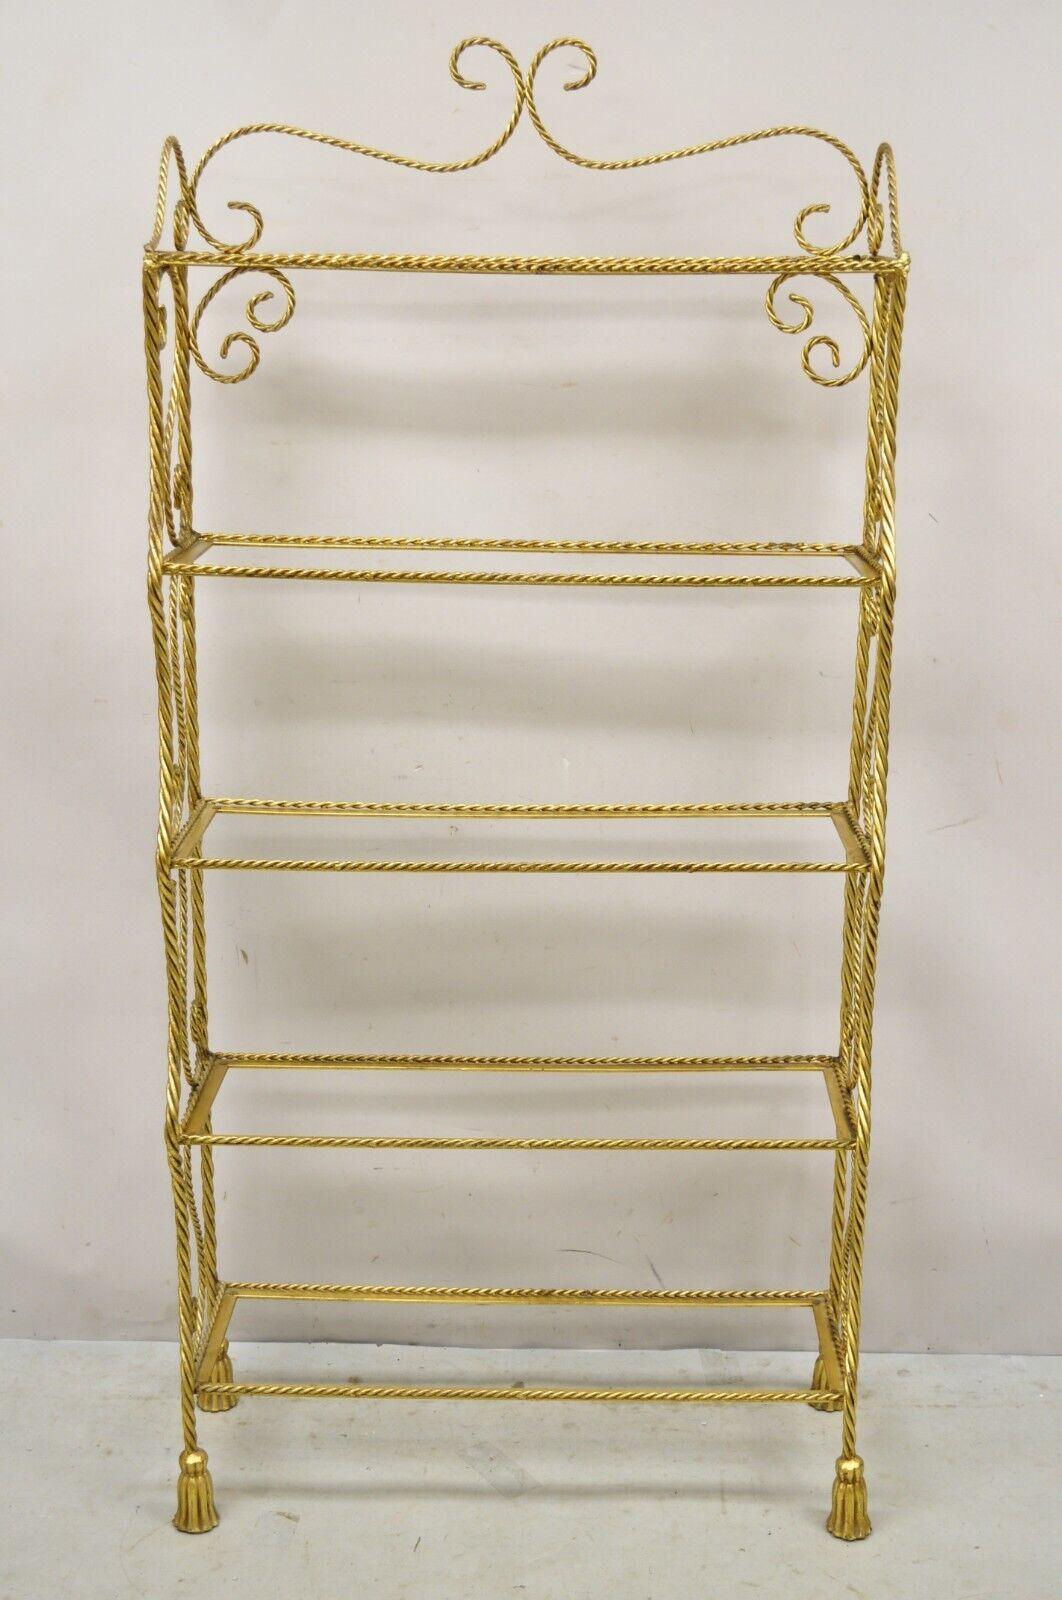 Italian Hollywood Regency Gold Gilt Iron 5 Tier Rope Tassel Etagere Shelf Stand. Item features a gold gilt iron frame, rope design with tassel feet, 5 tiers (no glass shelves), wrought iron construction, very nice vintage item, quality Italian